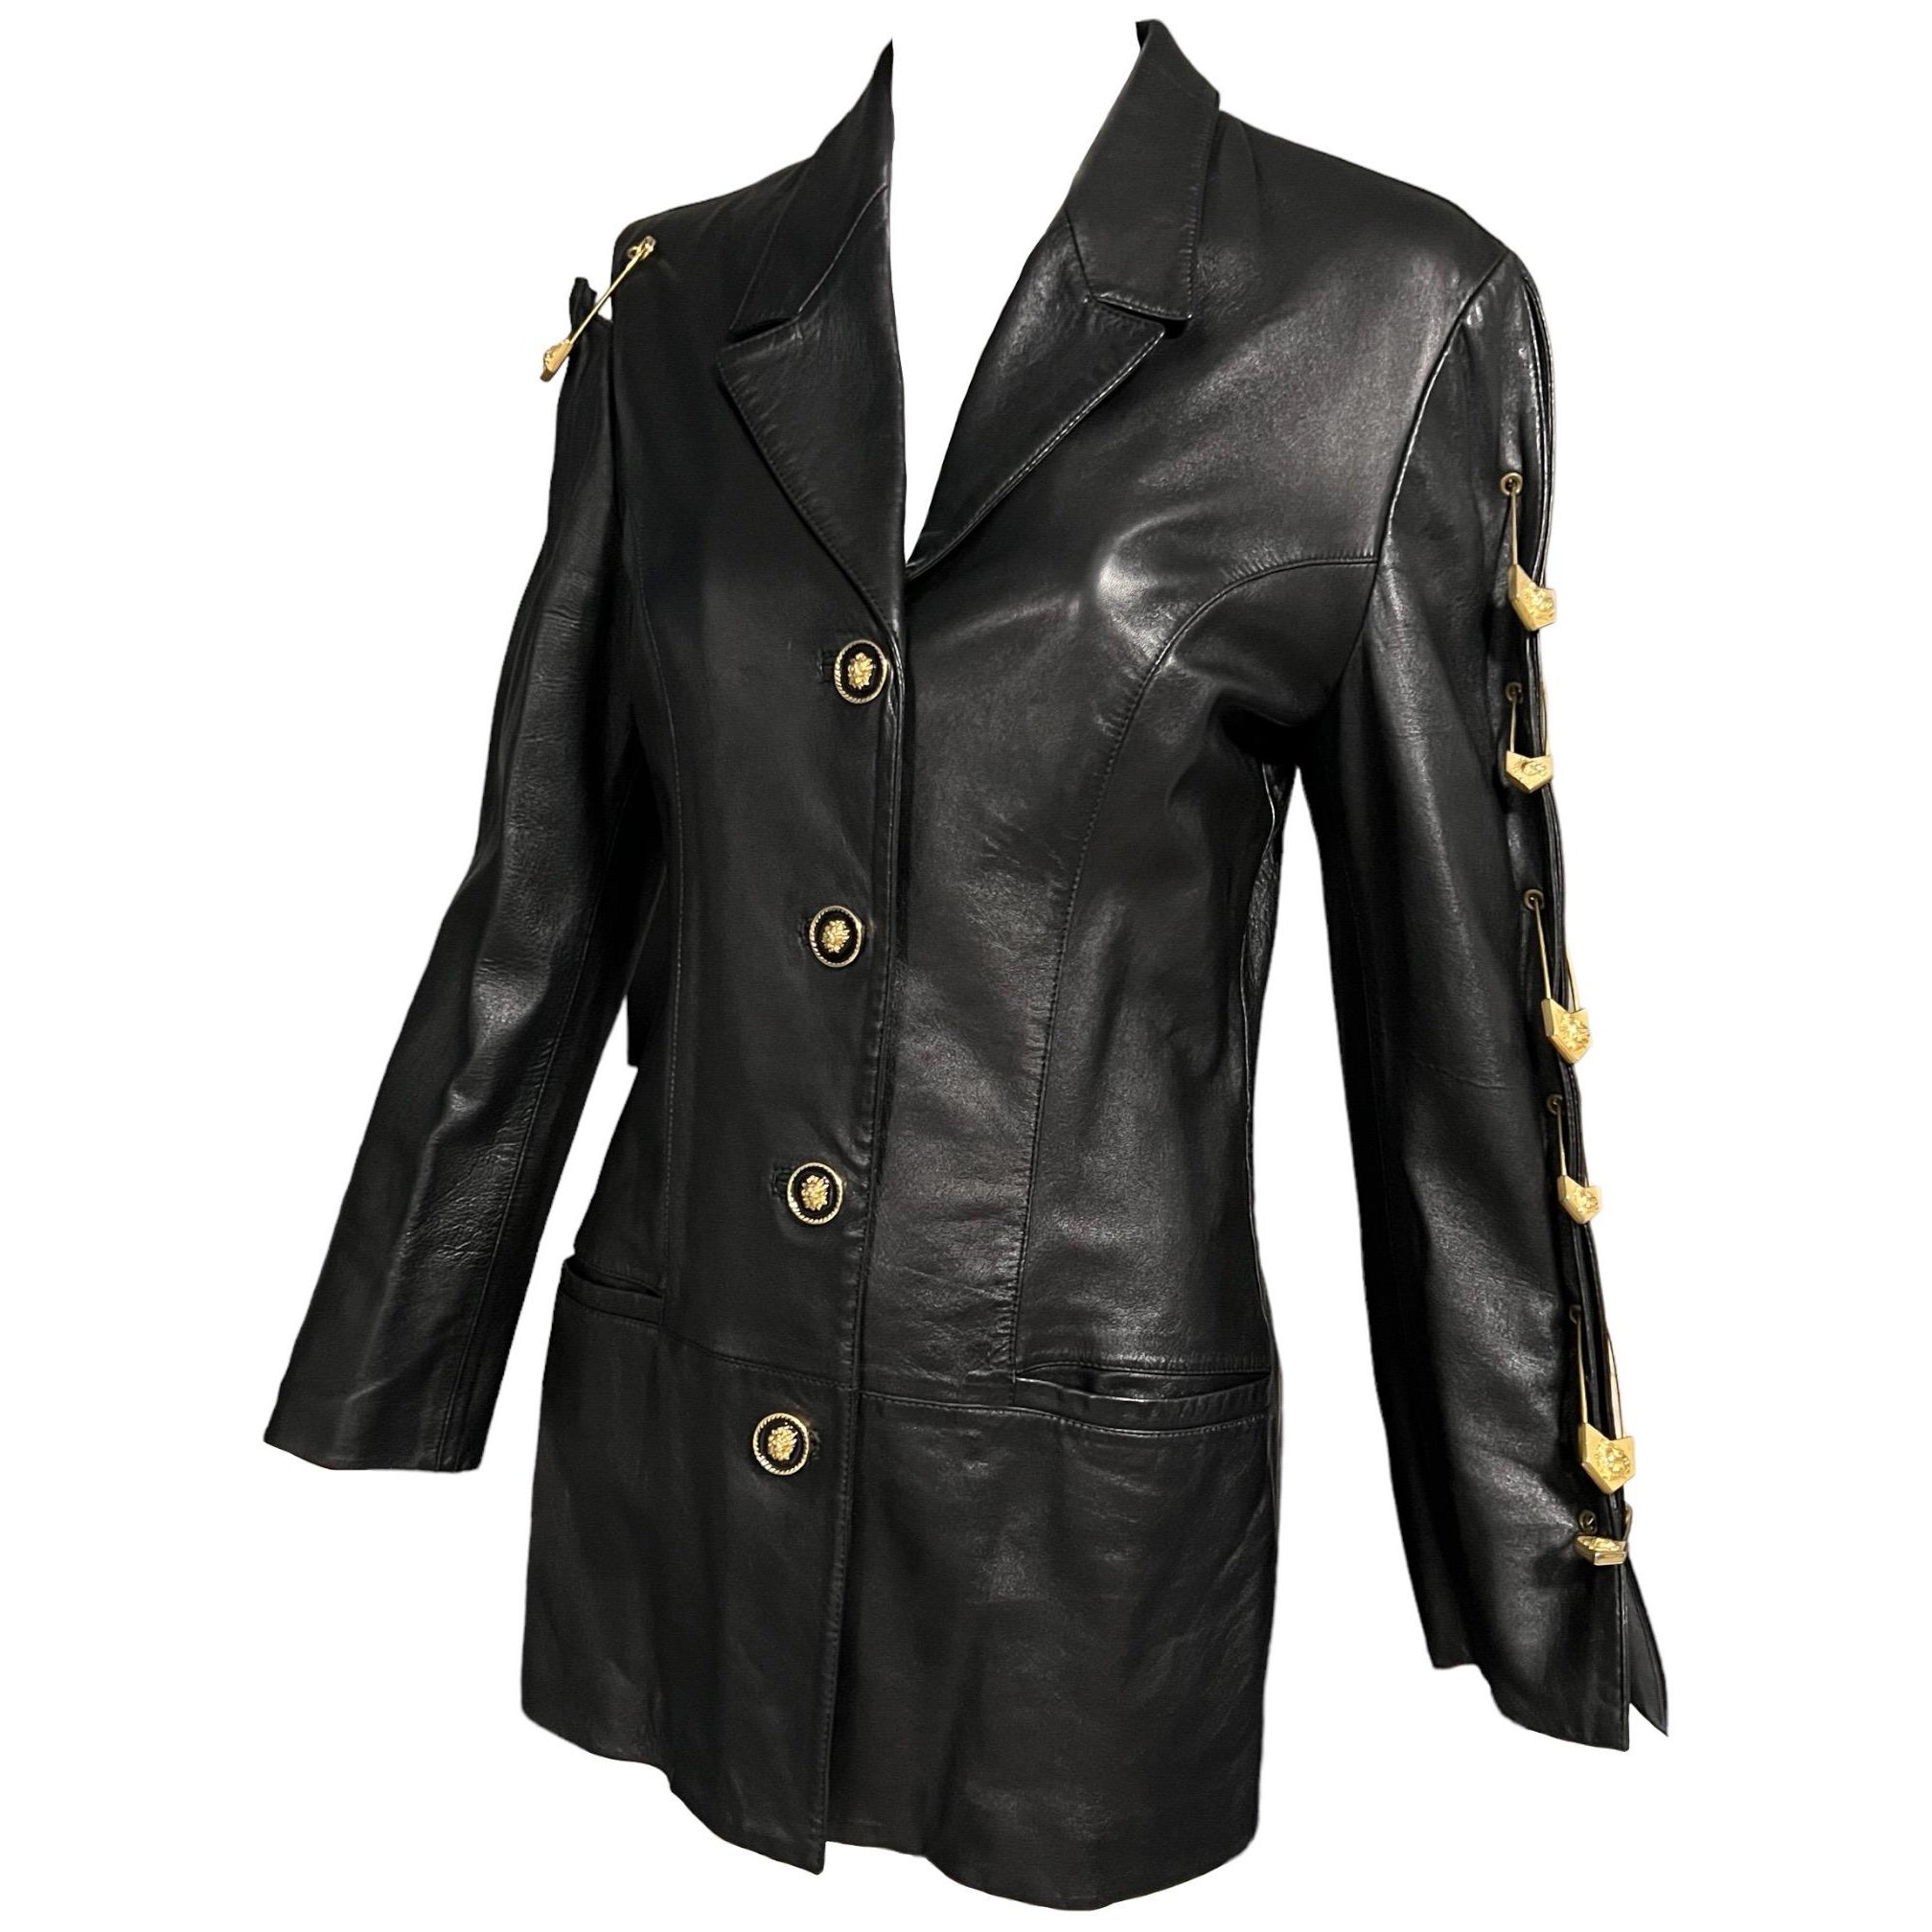 Iconic rare Versus Gianni Versace black leather safety pin blazer
Soft black leather with slit detailing on the sleeve and cutout detail on the shoulder.
Gold and black lion head buttons
Extra large gold lion head safety pins embellishments adorn